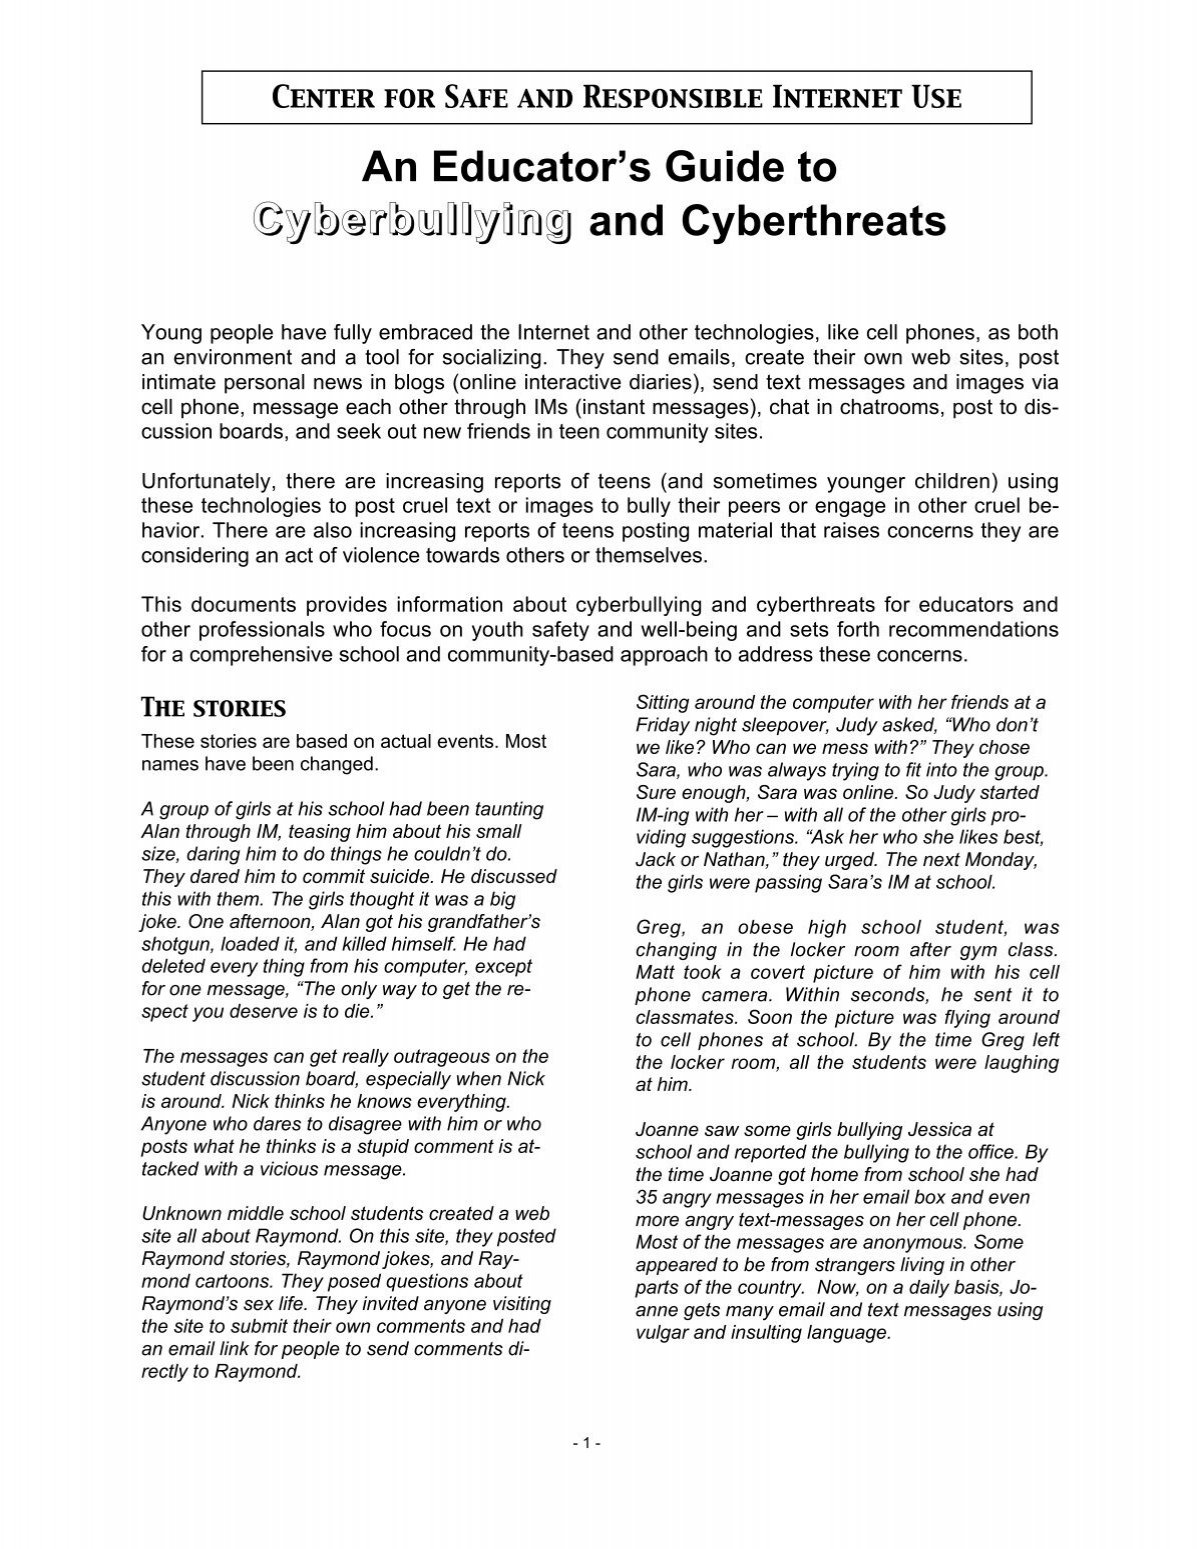 An Educators Guide to Cyberbullying and Cyberthreats image